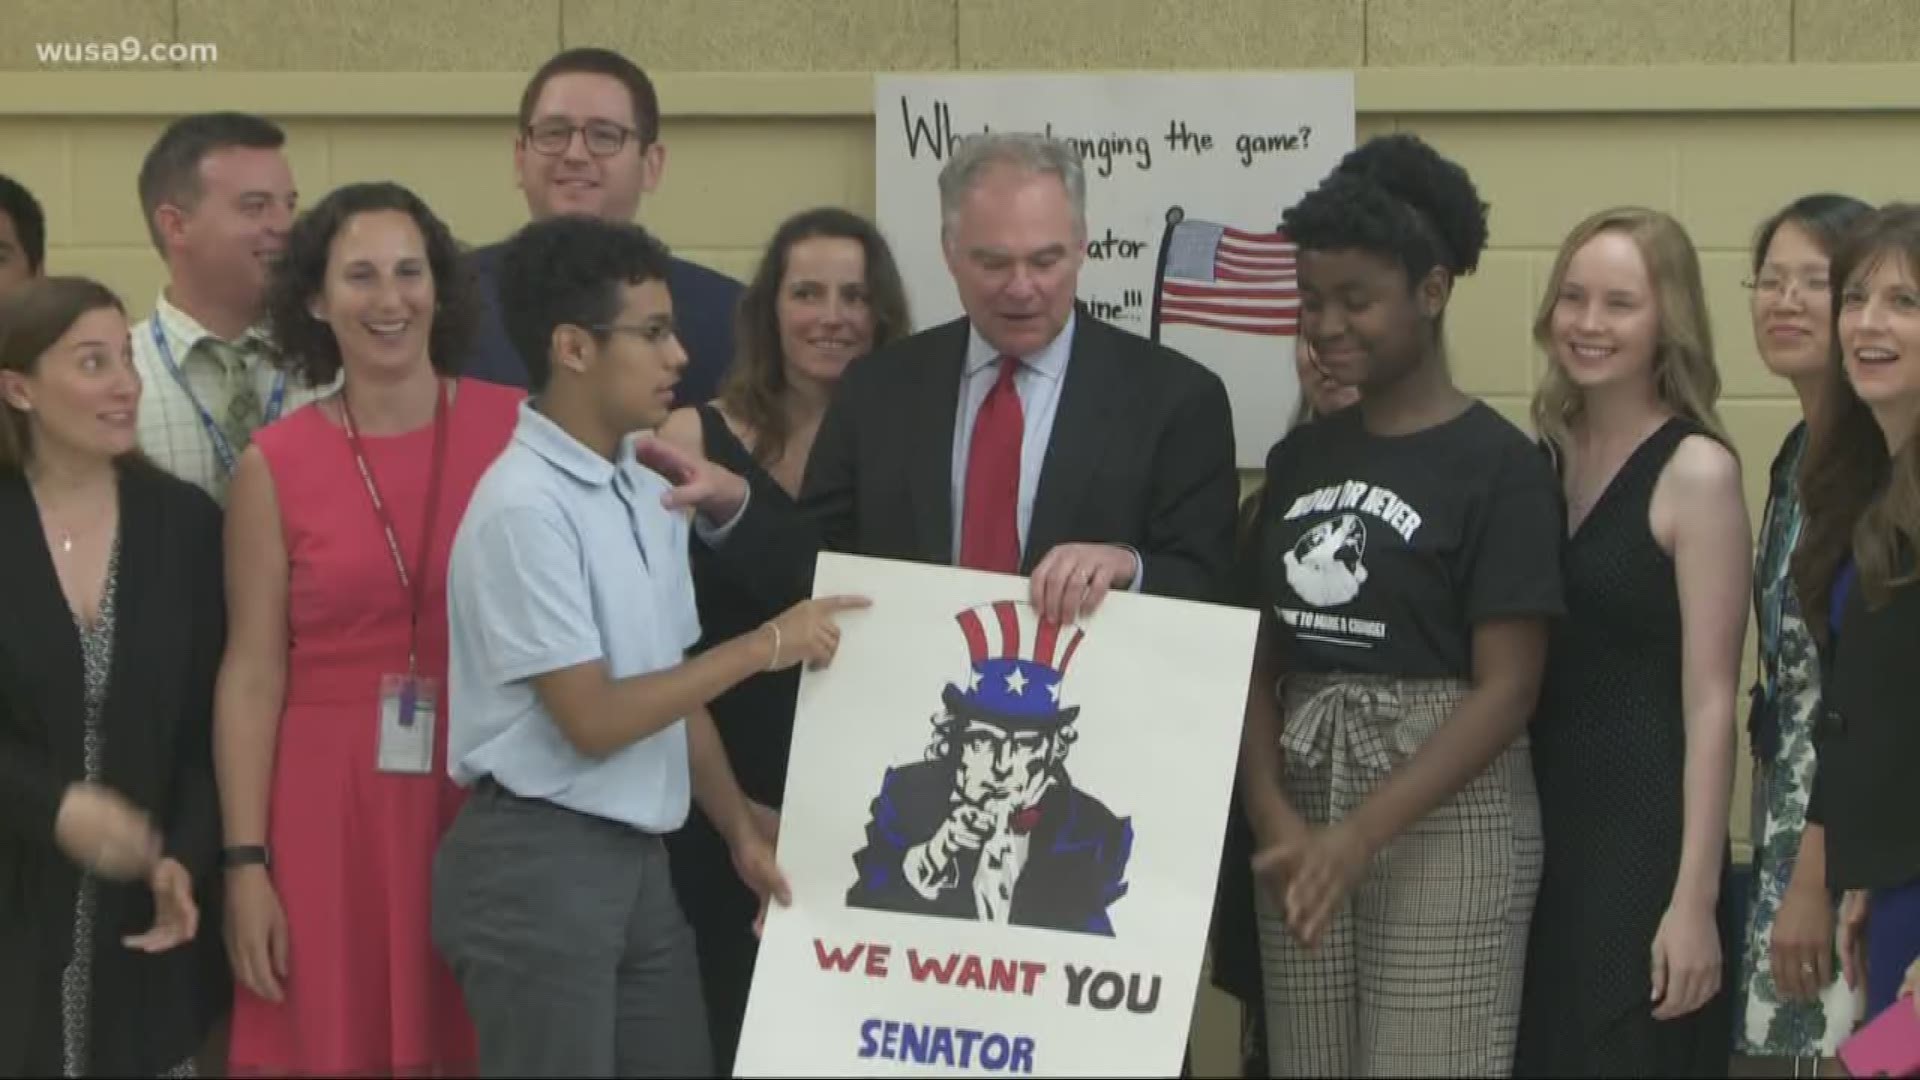 Virginia Senator Tim Kaine spoke to an enthusiastic group of middle school students today in Northern Virginia. Janice Park tells us, a group of students at Key Middle School in Springfield, isn't waiting for Congress to act.